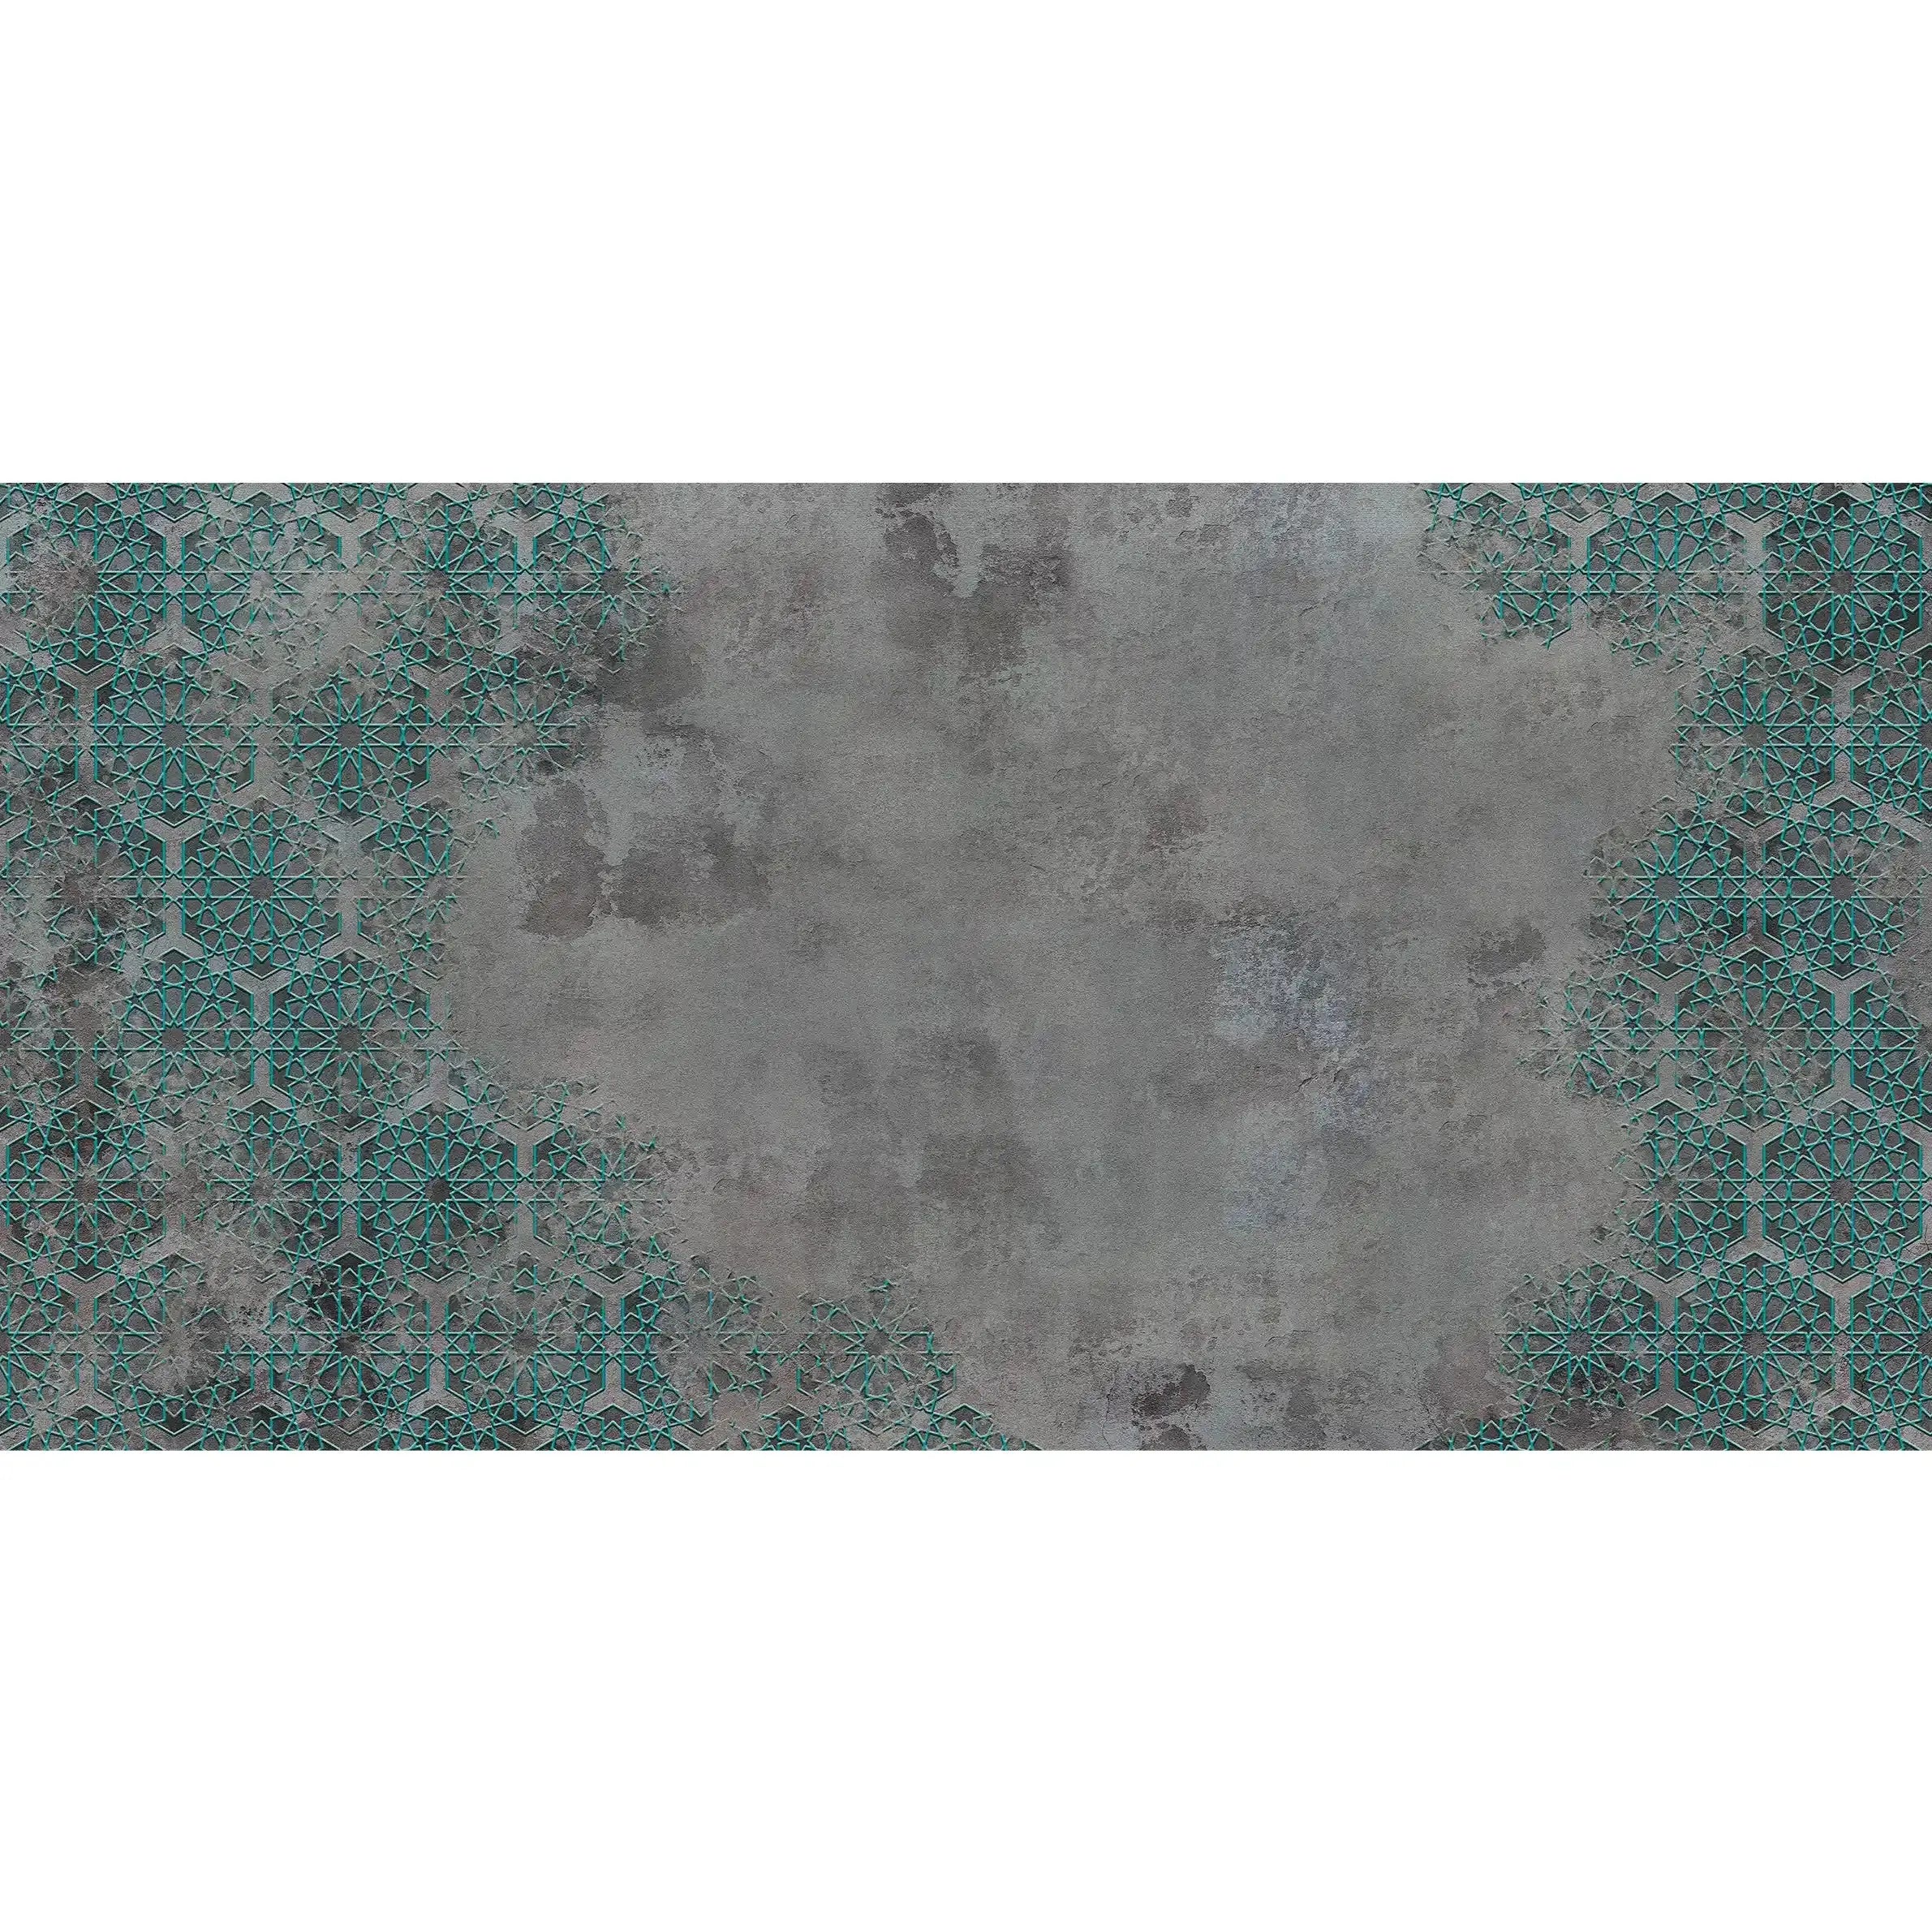 3068-B / Elegant Floral Abstract Peel and Stick Wallpaper with Turquoise Border - Perfect for Modern Room Deco - Artevella